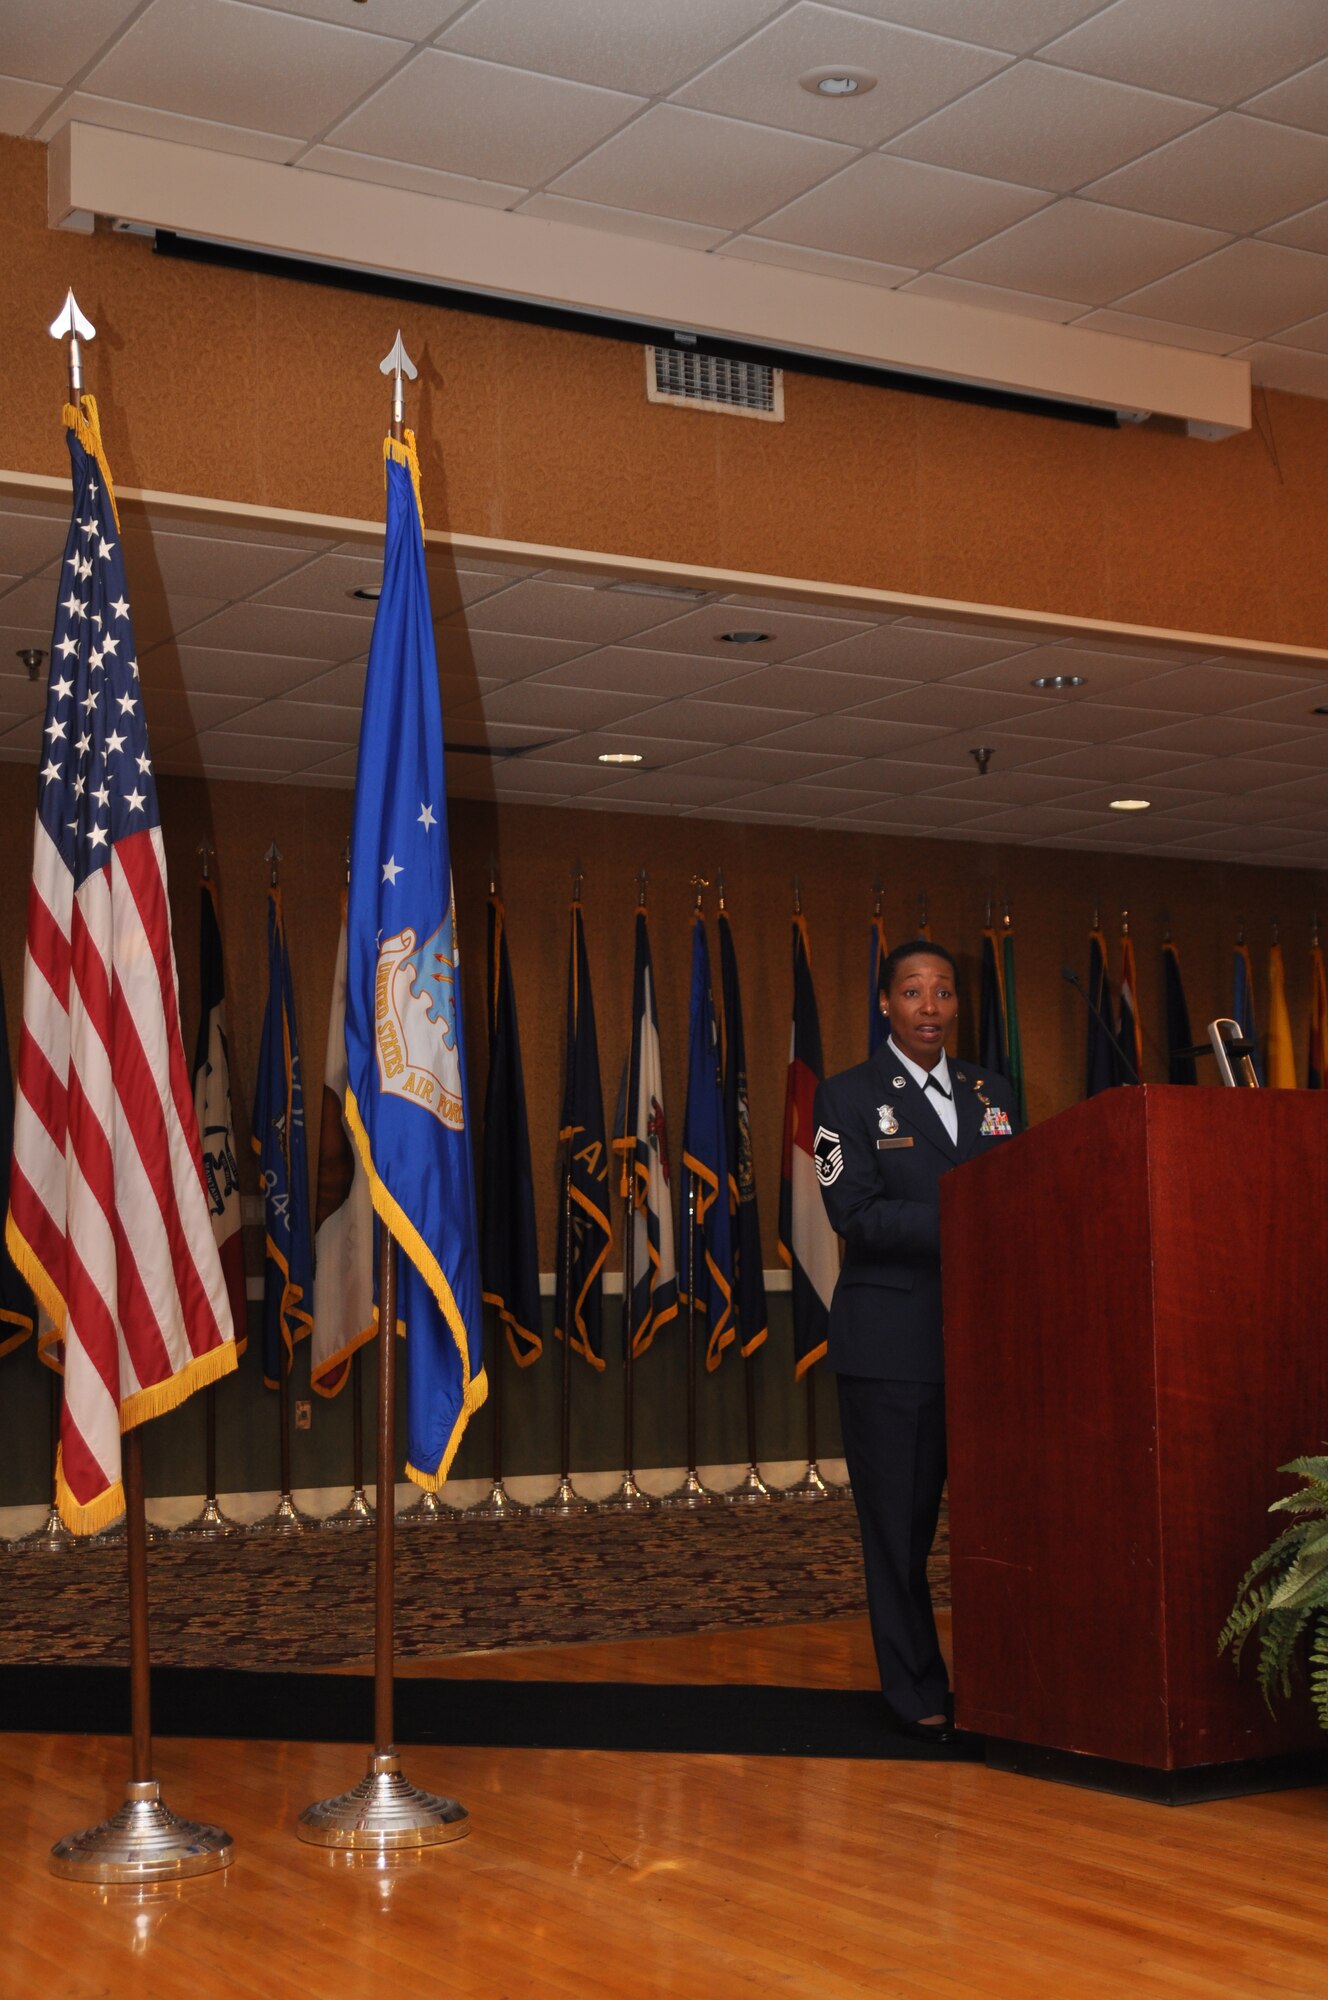 Senior Master Sgt. Veronica Spears, 14th Security Forces Superintendent was the guest speaker for the Women’s History Month Breakfast. Standing room only was all that was left for those who came to hear her speak. (U.S. Air Force photo/Airman 1st Class Chase Hedrick)